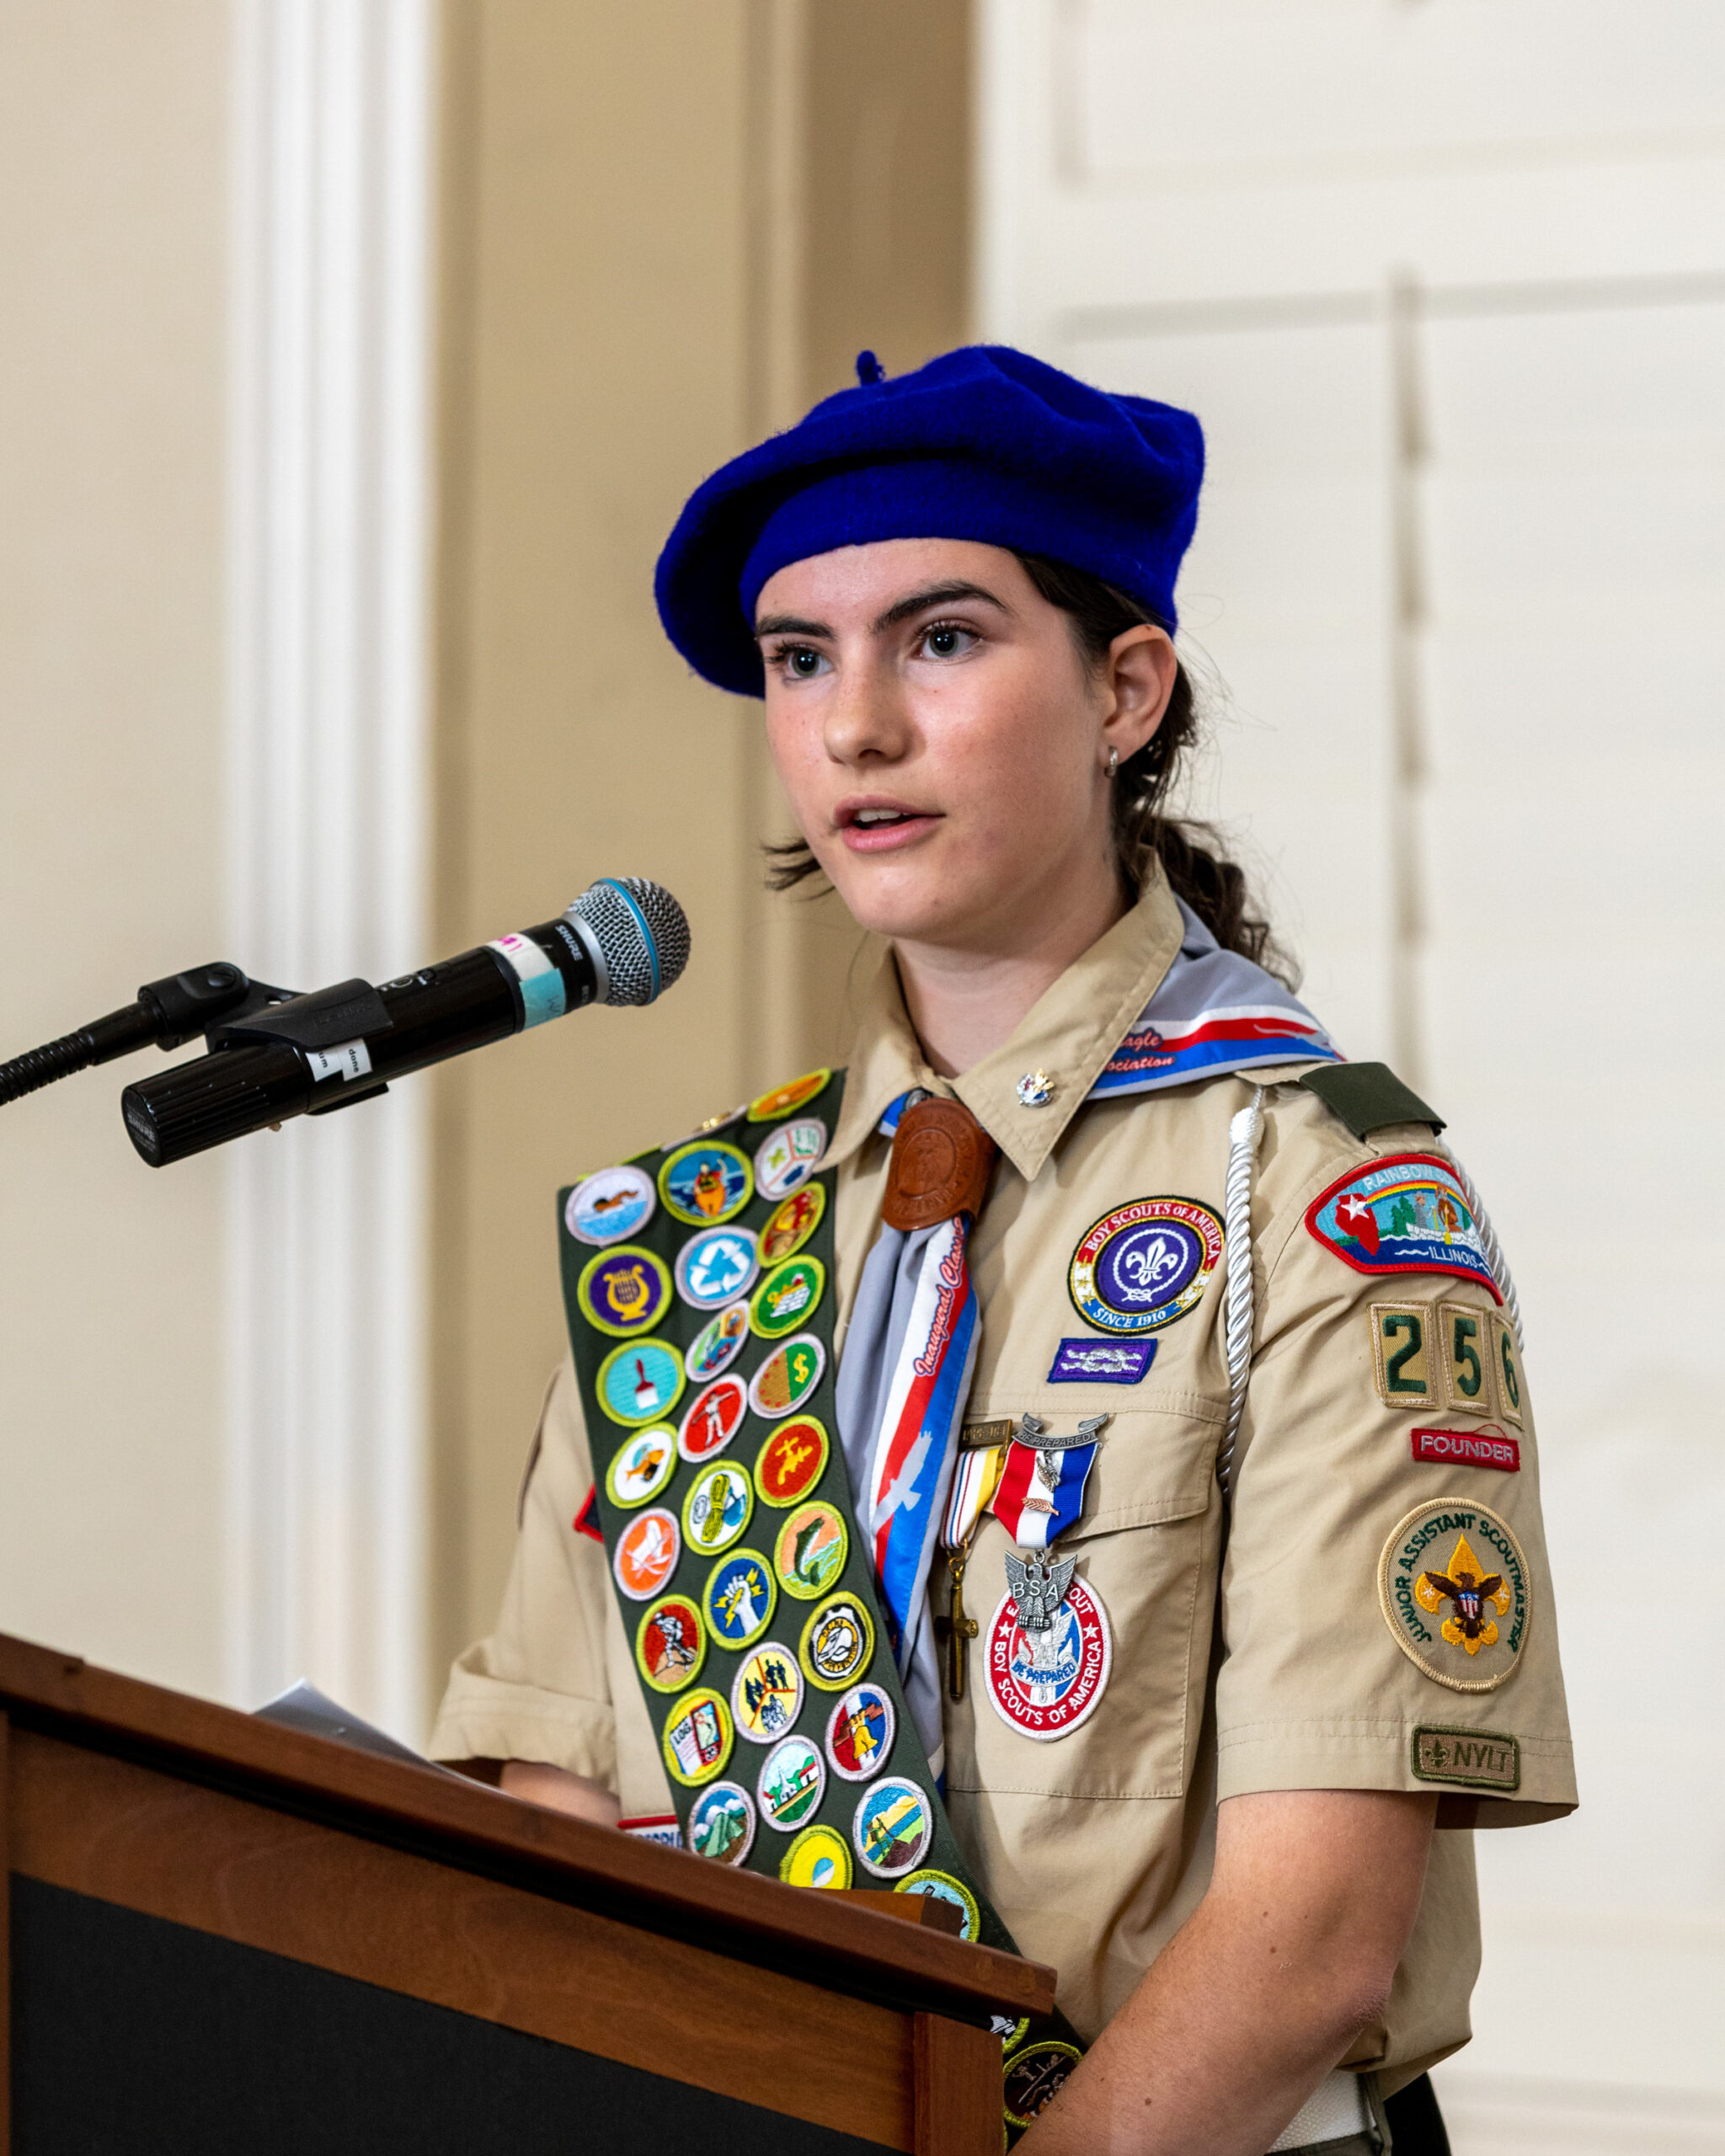 Portrait photo of female-presenting individual with long dark hair. They are wearing a tan scouting uniform with several badges and a hat. They are standing and speaking at a podium.